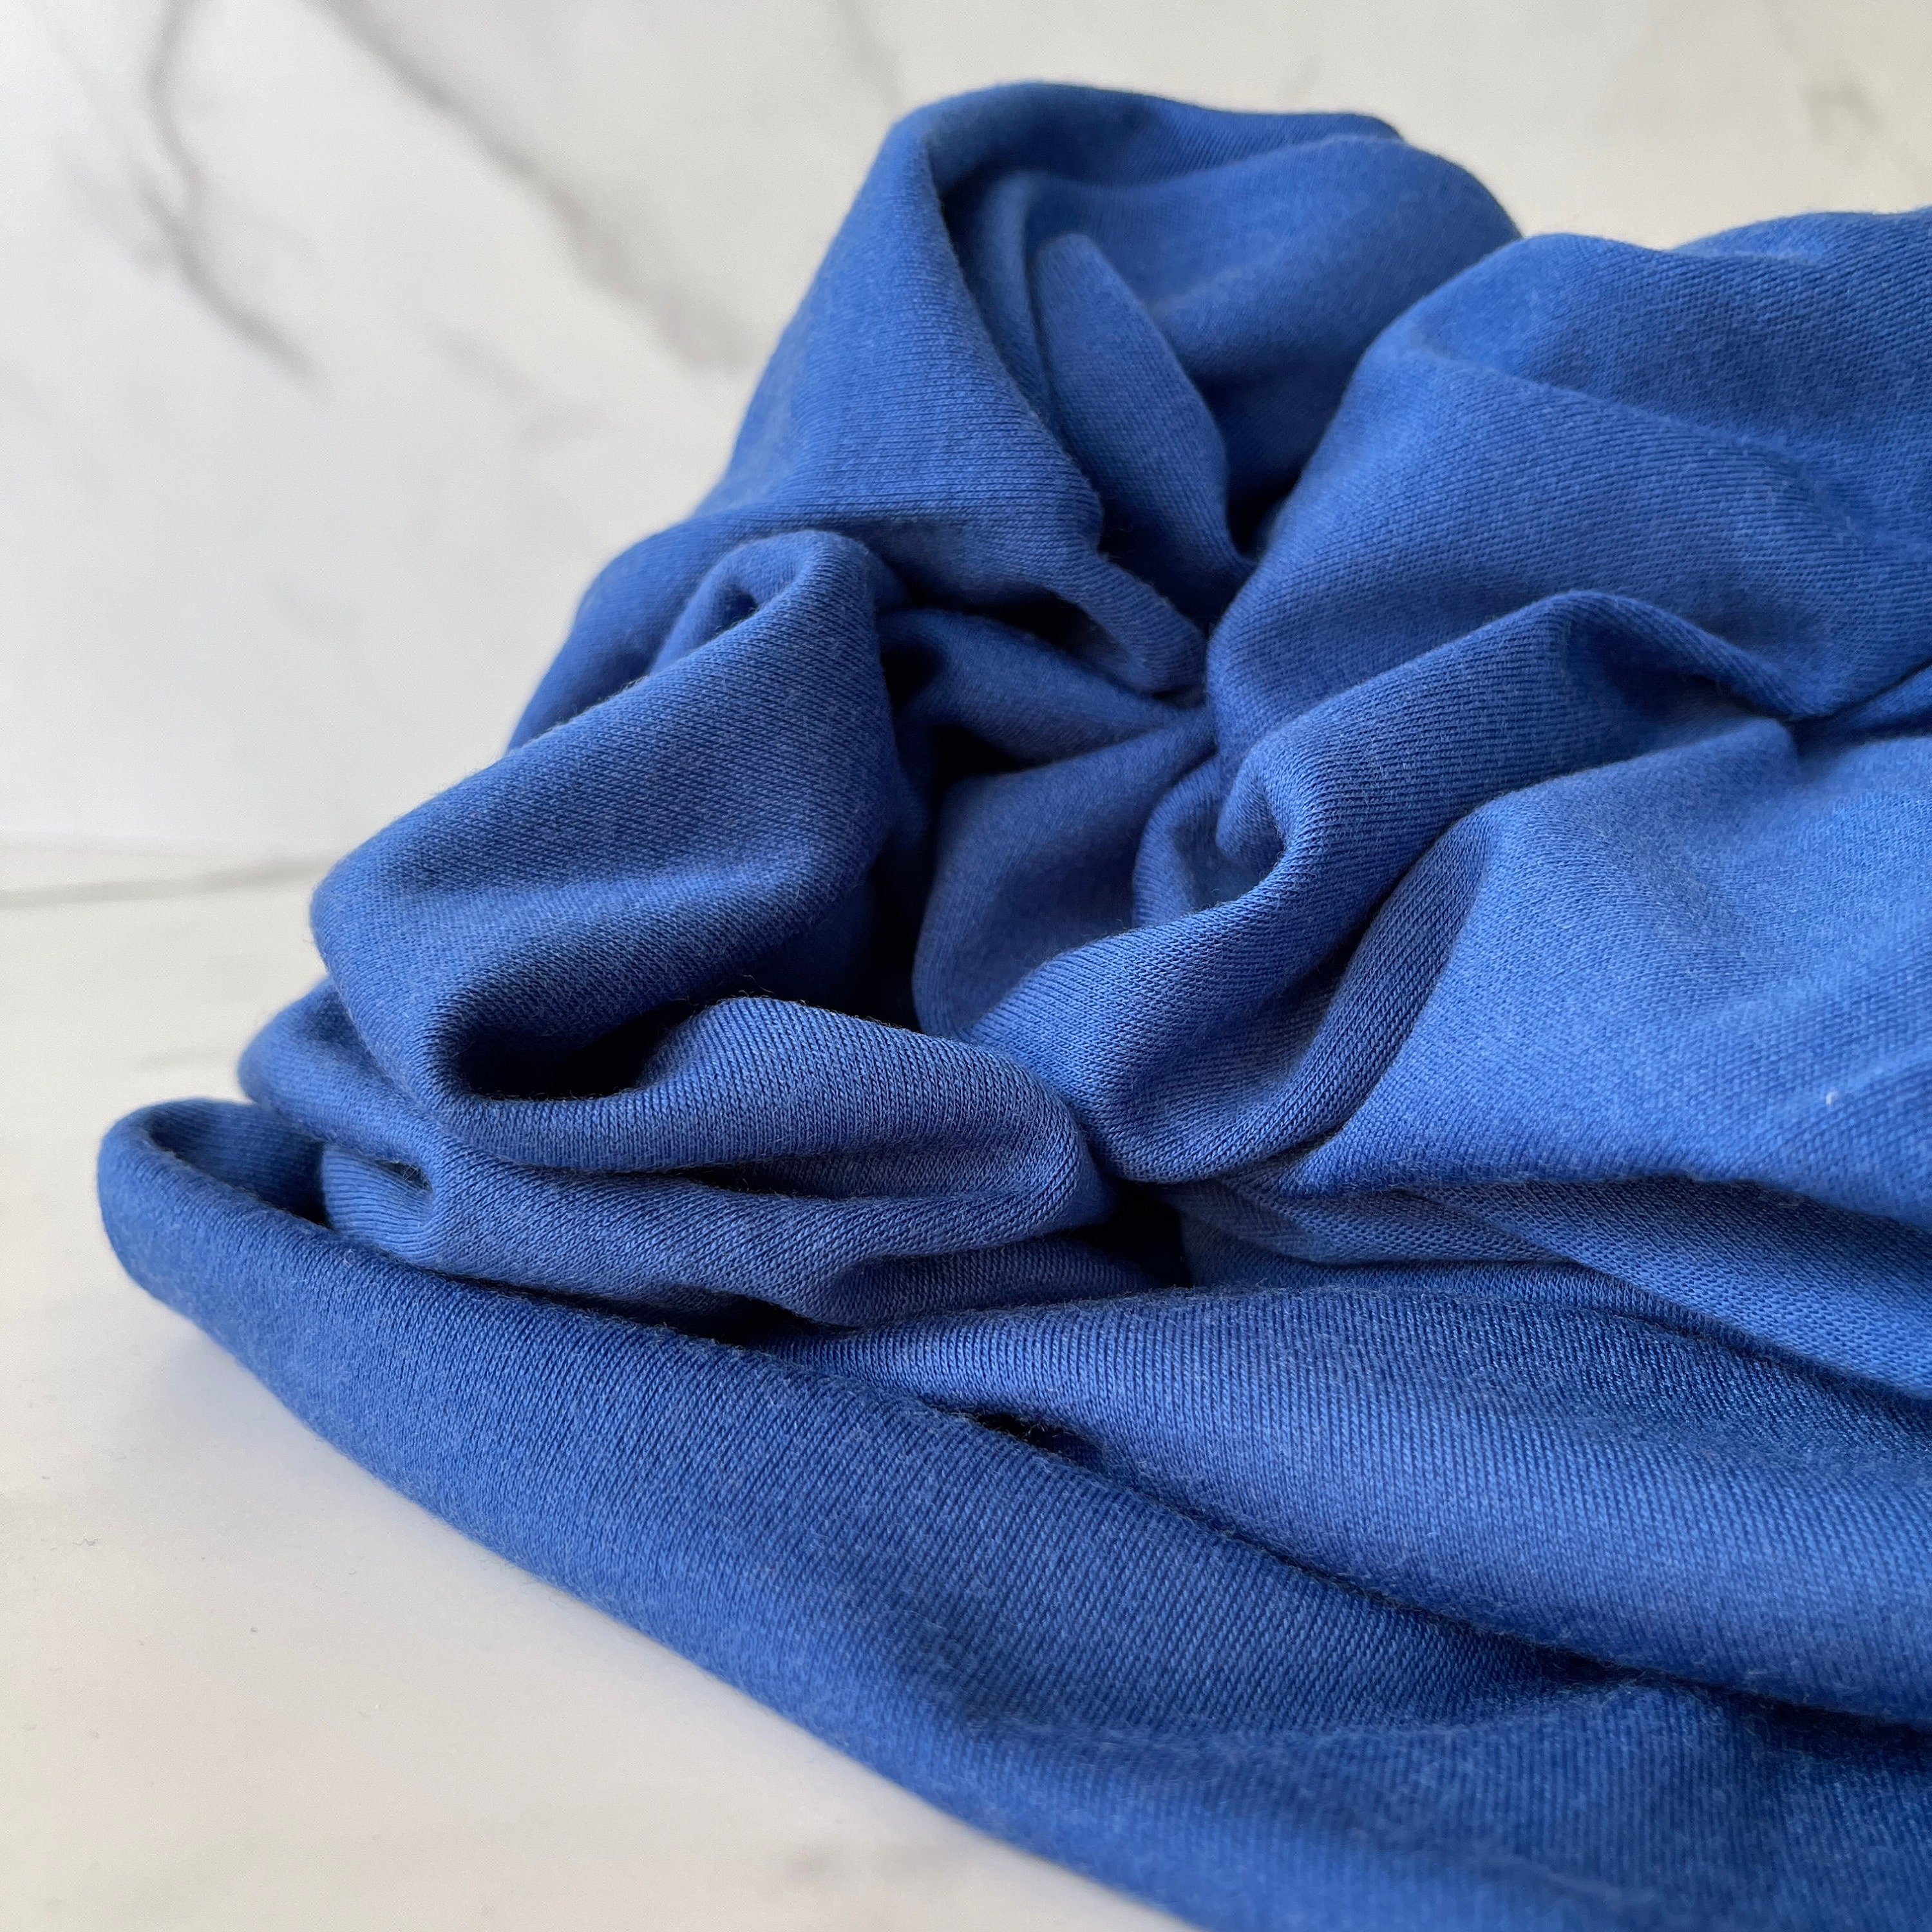 Merino Wool Fabric 240 gsm Wool Fabric By The Yard Stretch Rib Knit Hiking  Outdoor Natural Fabric Sewing Clothes -Blue MW045W